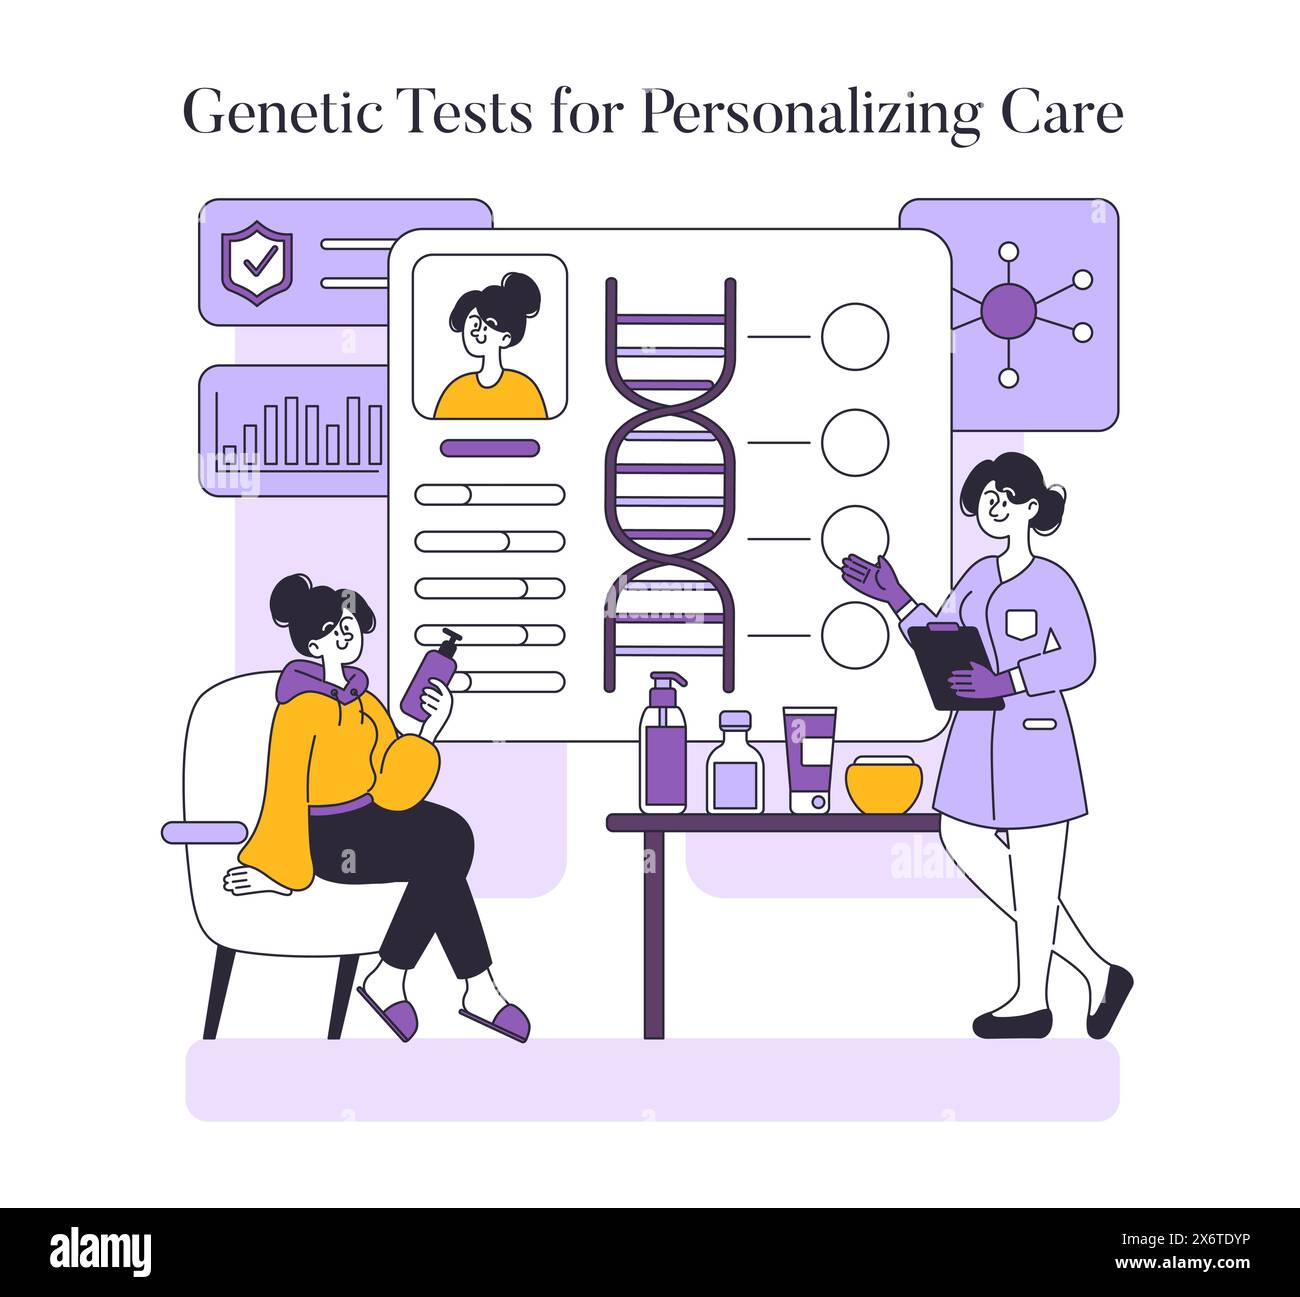 Genetic testing concept. Tailored healthcare solutions using DNA analysis. Patient and scientist exploring personalized treatment options. Vector illustration. Stock Vector